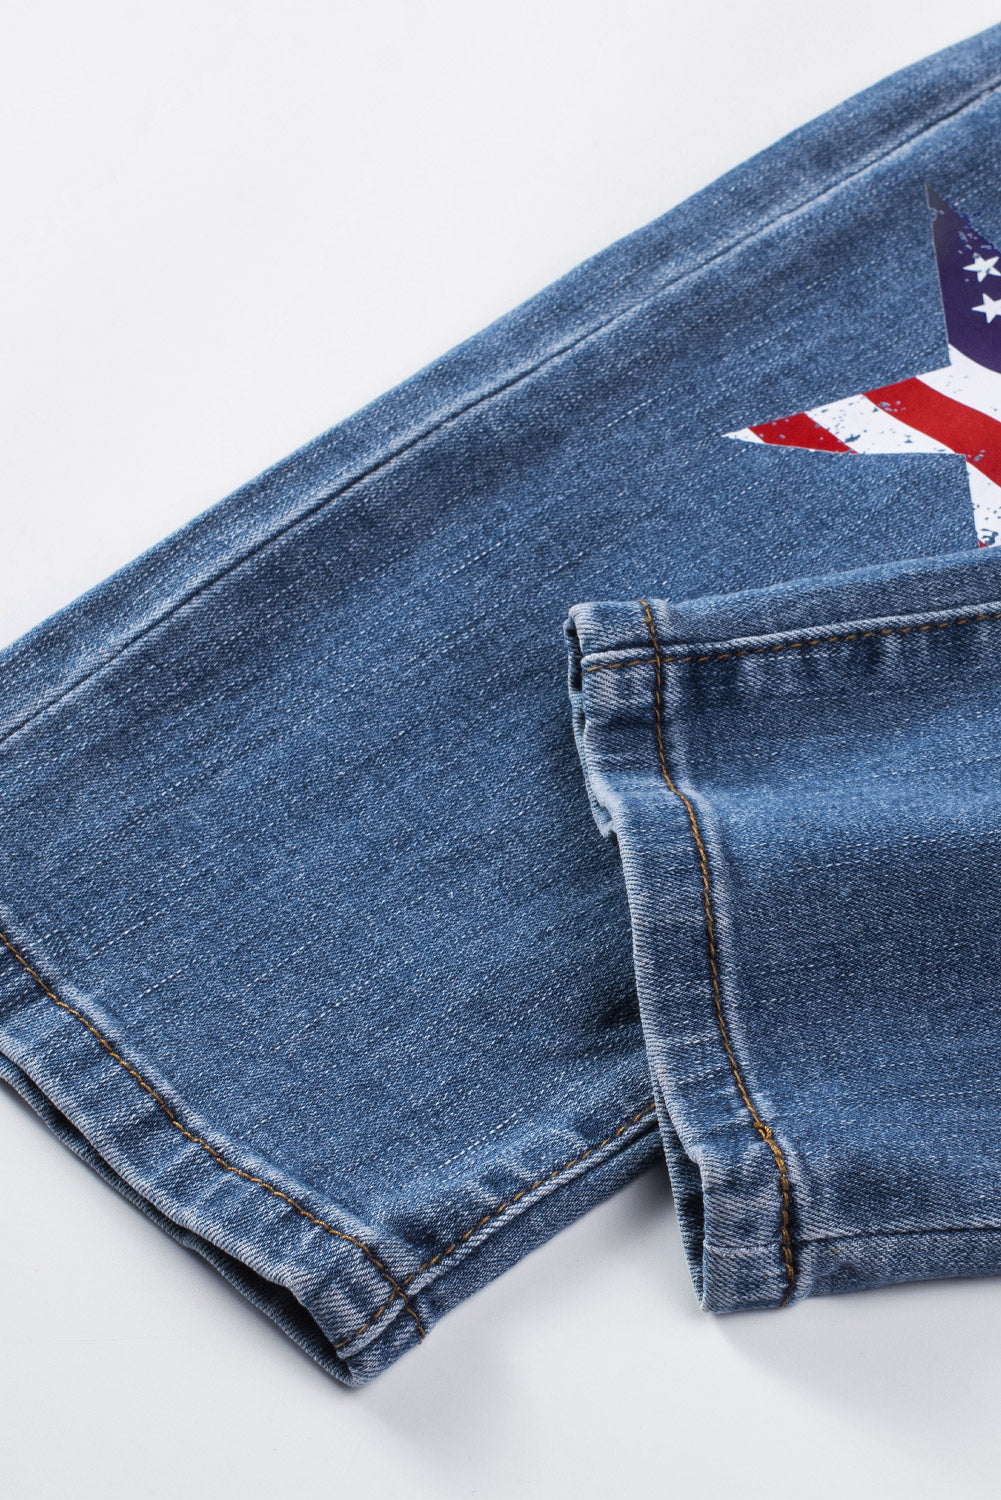 Patriotic Jeans with Pockets Distressed Straight Leg Ripped Jeans with American Flag